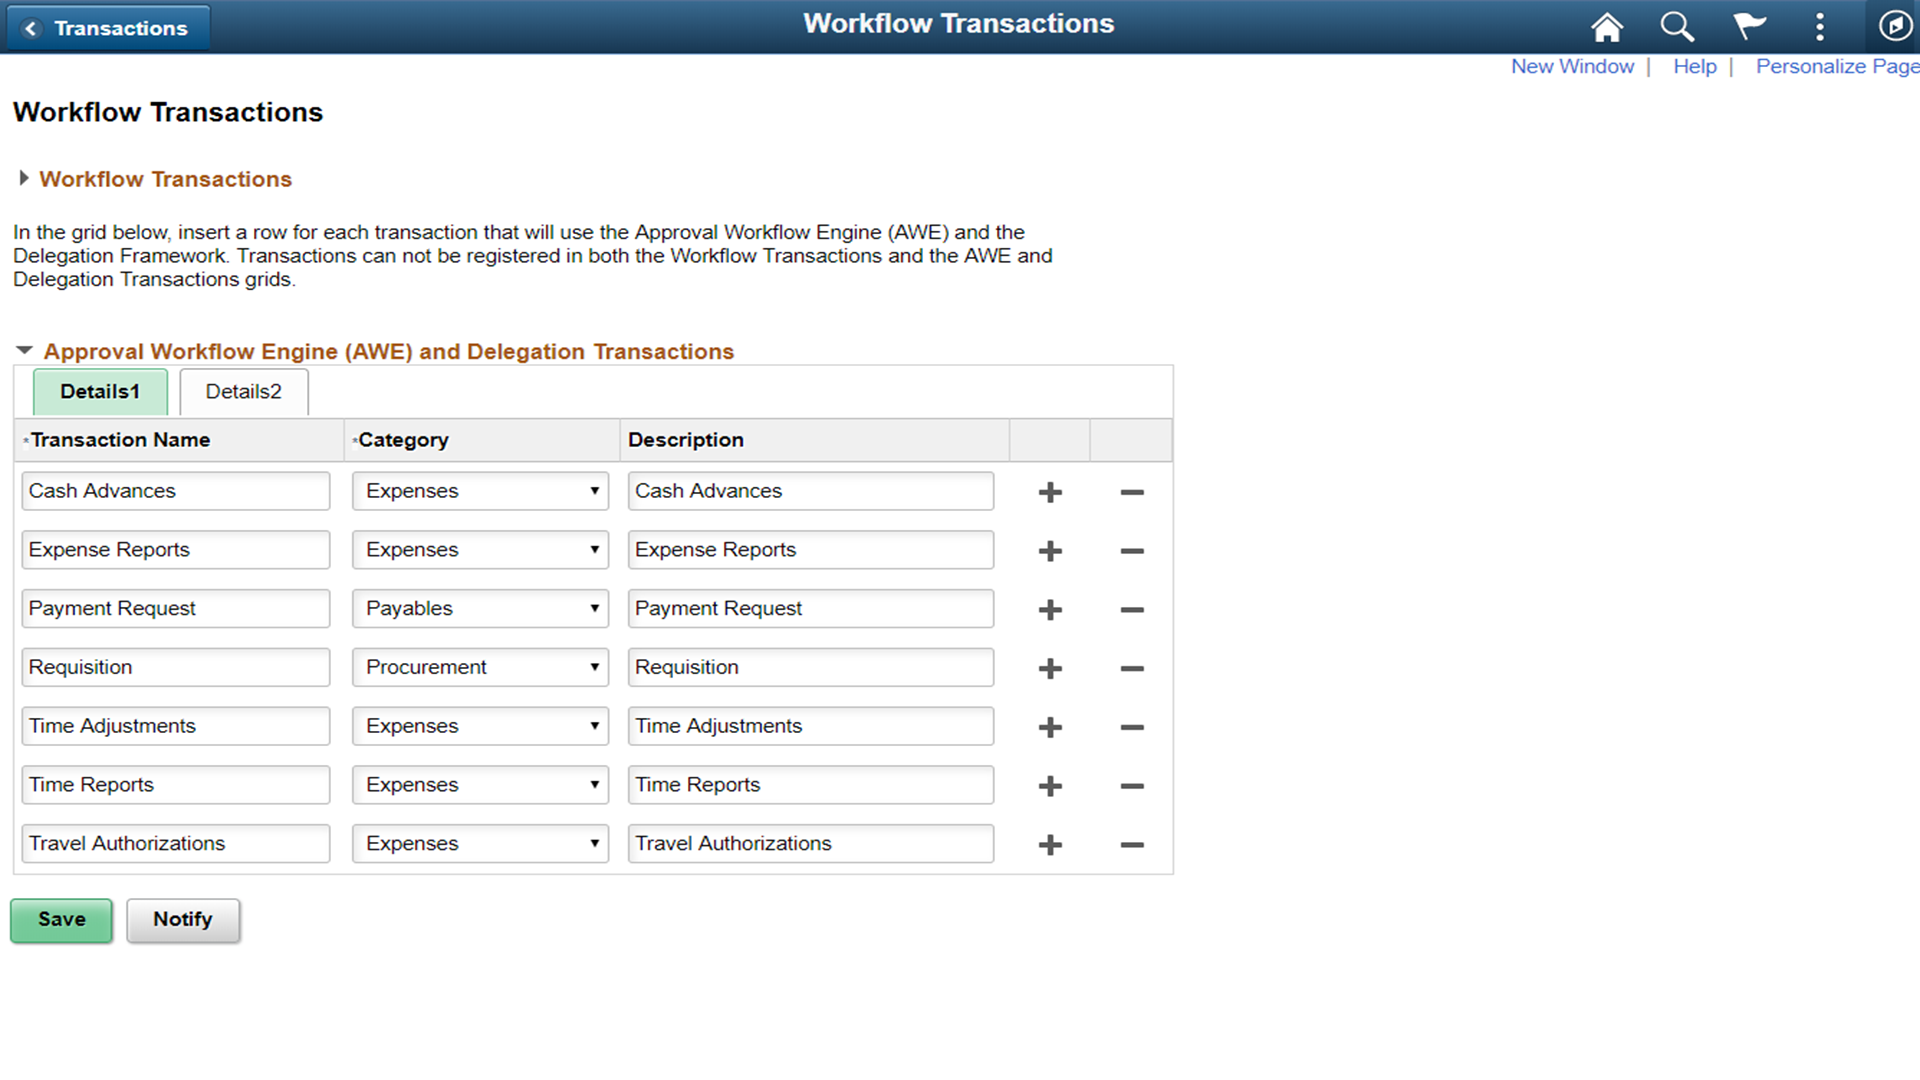 Workflow Transactions Details 1 page